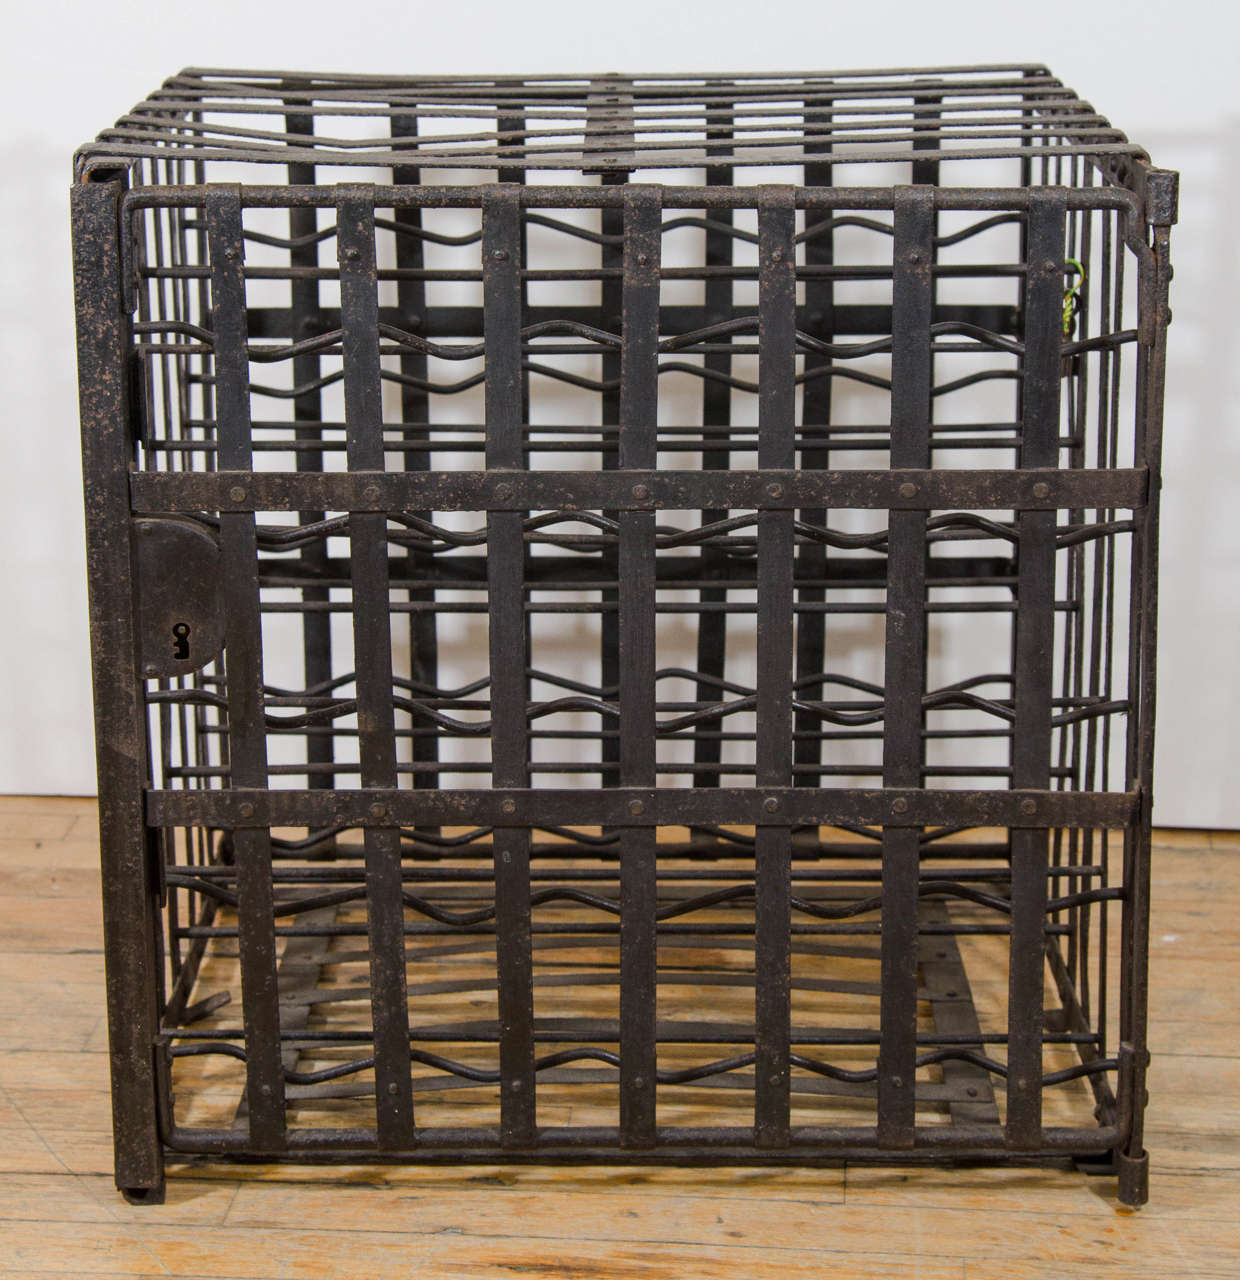 A 20th century iron cage form Industrial style wine rack from Germany.
Good vintage condition with age appropriate patina. Some rust spots.